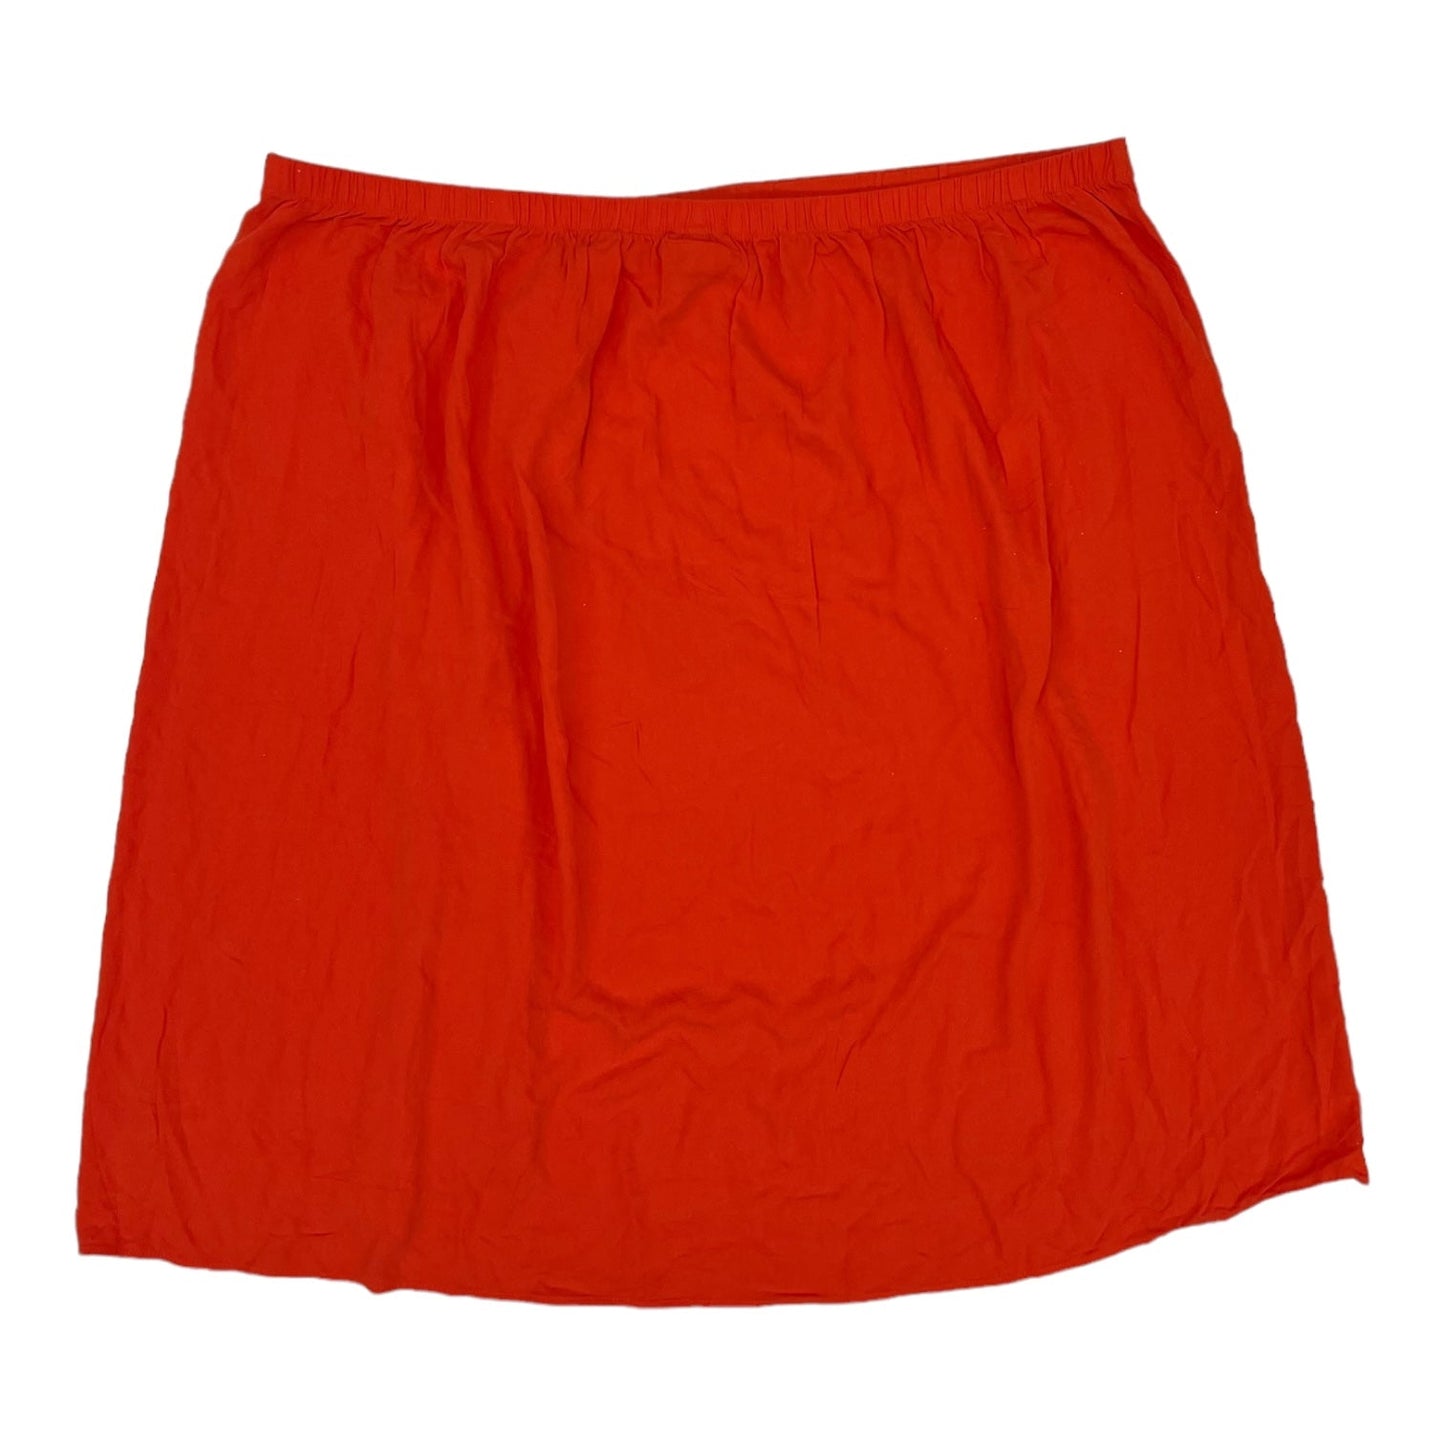 Skirt Mini & Short By Knox Rose  Size: 3x